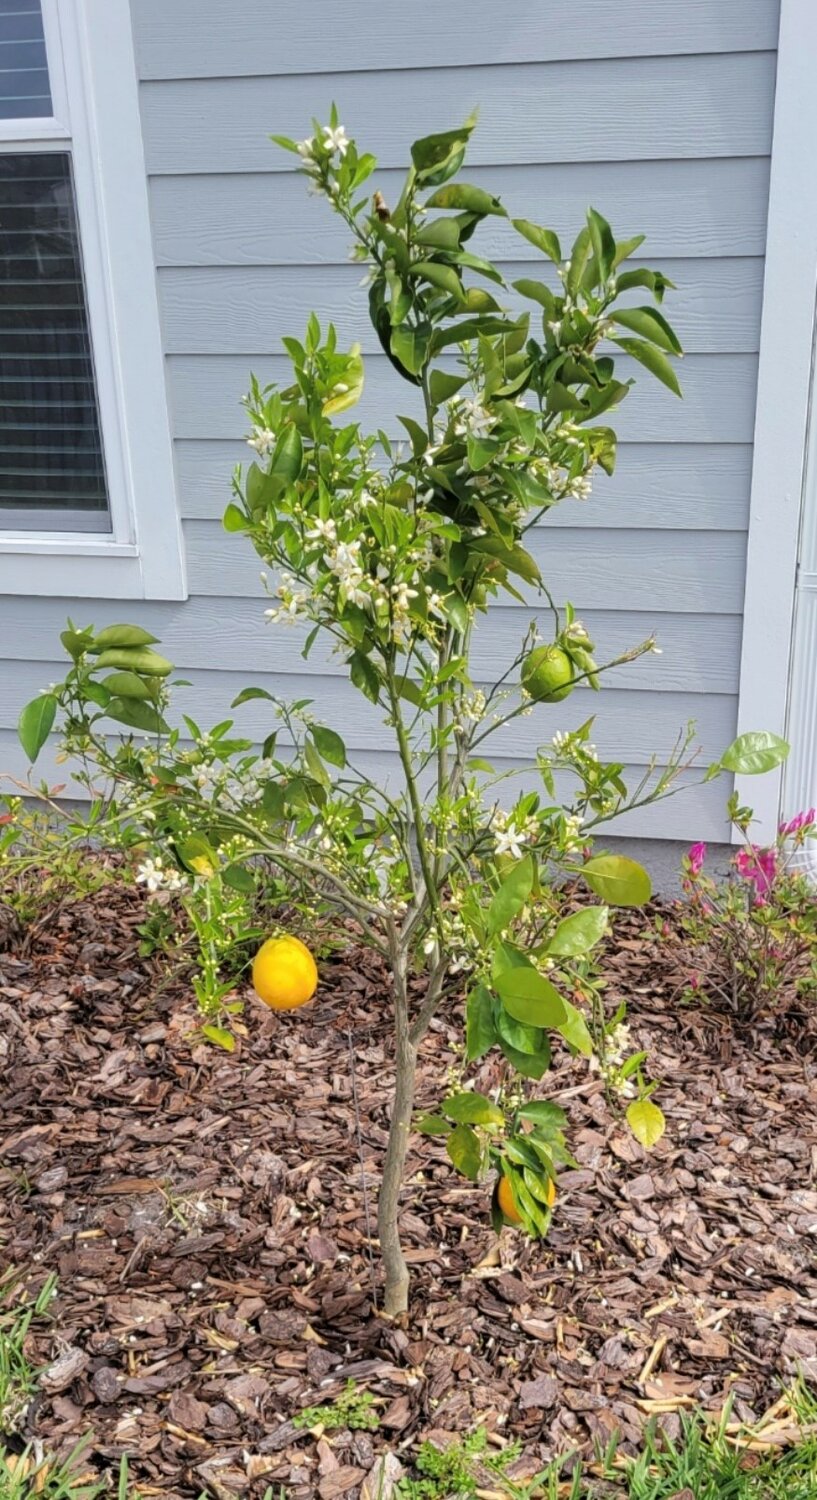 Citrus tree, newly planted with flowers and fruit